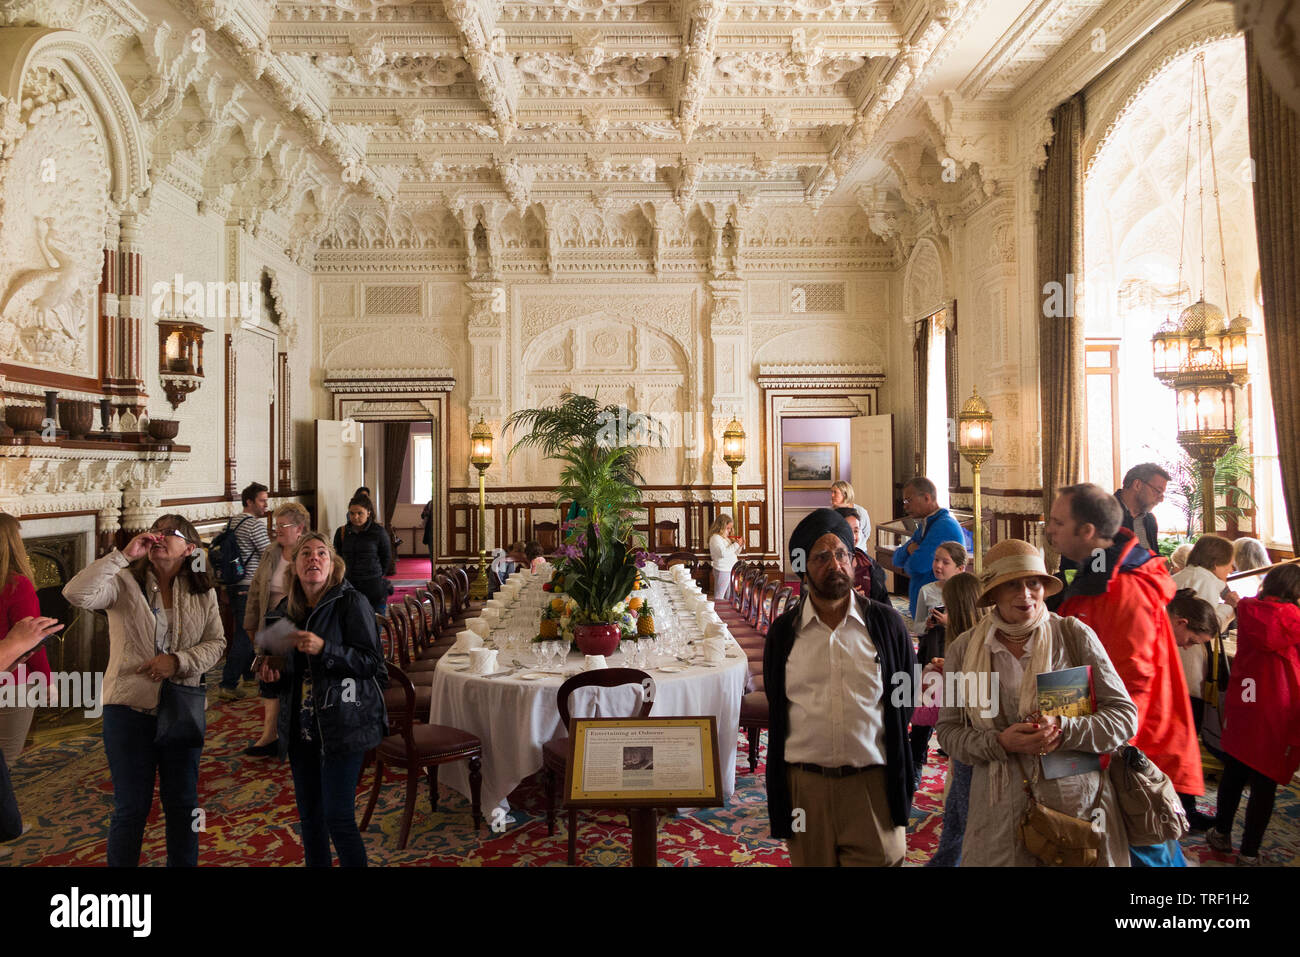 Tourists / visitors inside the Durbar Room at Osborne House on the Isle of Wight. UK. The Durbar Room was built by Queen Victoria after the death of her husband, Prince Albert. (99) Stock Photo